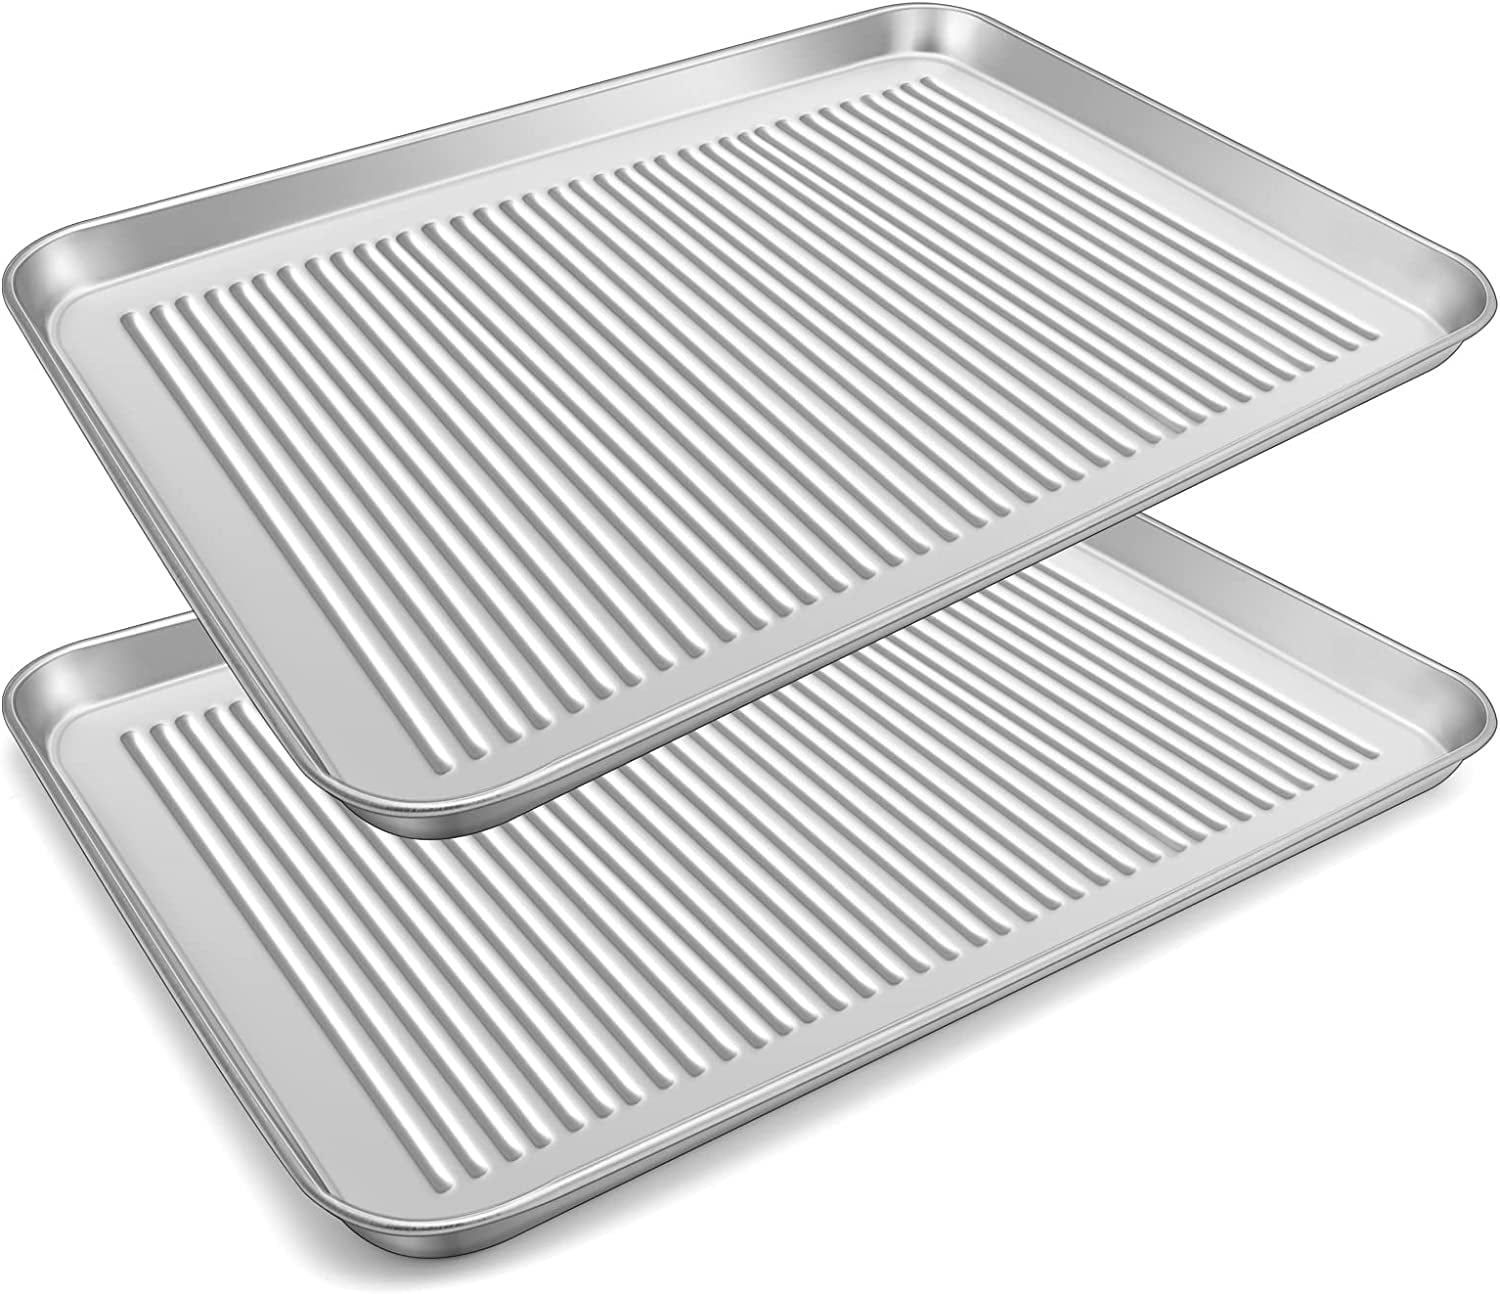 Wildone Baking Sheet Set of 2 - Stainless Steel Cookie Sheet Baking Pan,  Size 16 x 12 x 1 inch, Non Toxic & Heavy Duty & Mirror Finish & Rust Free 